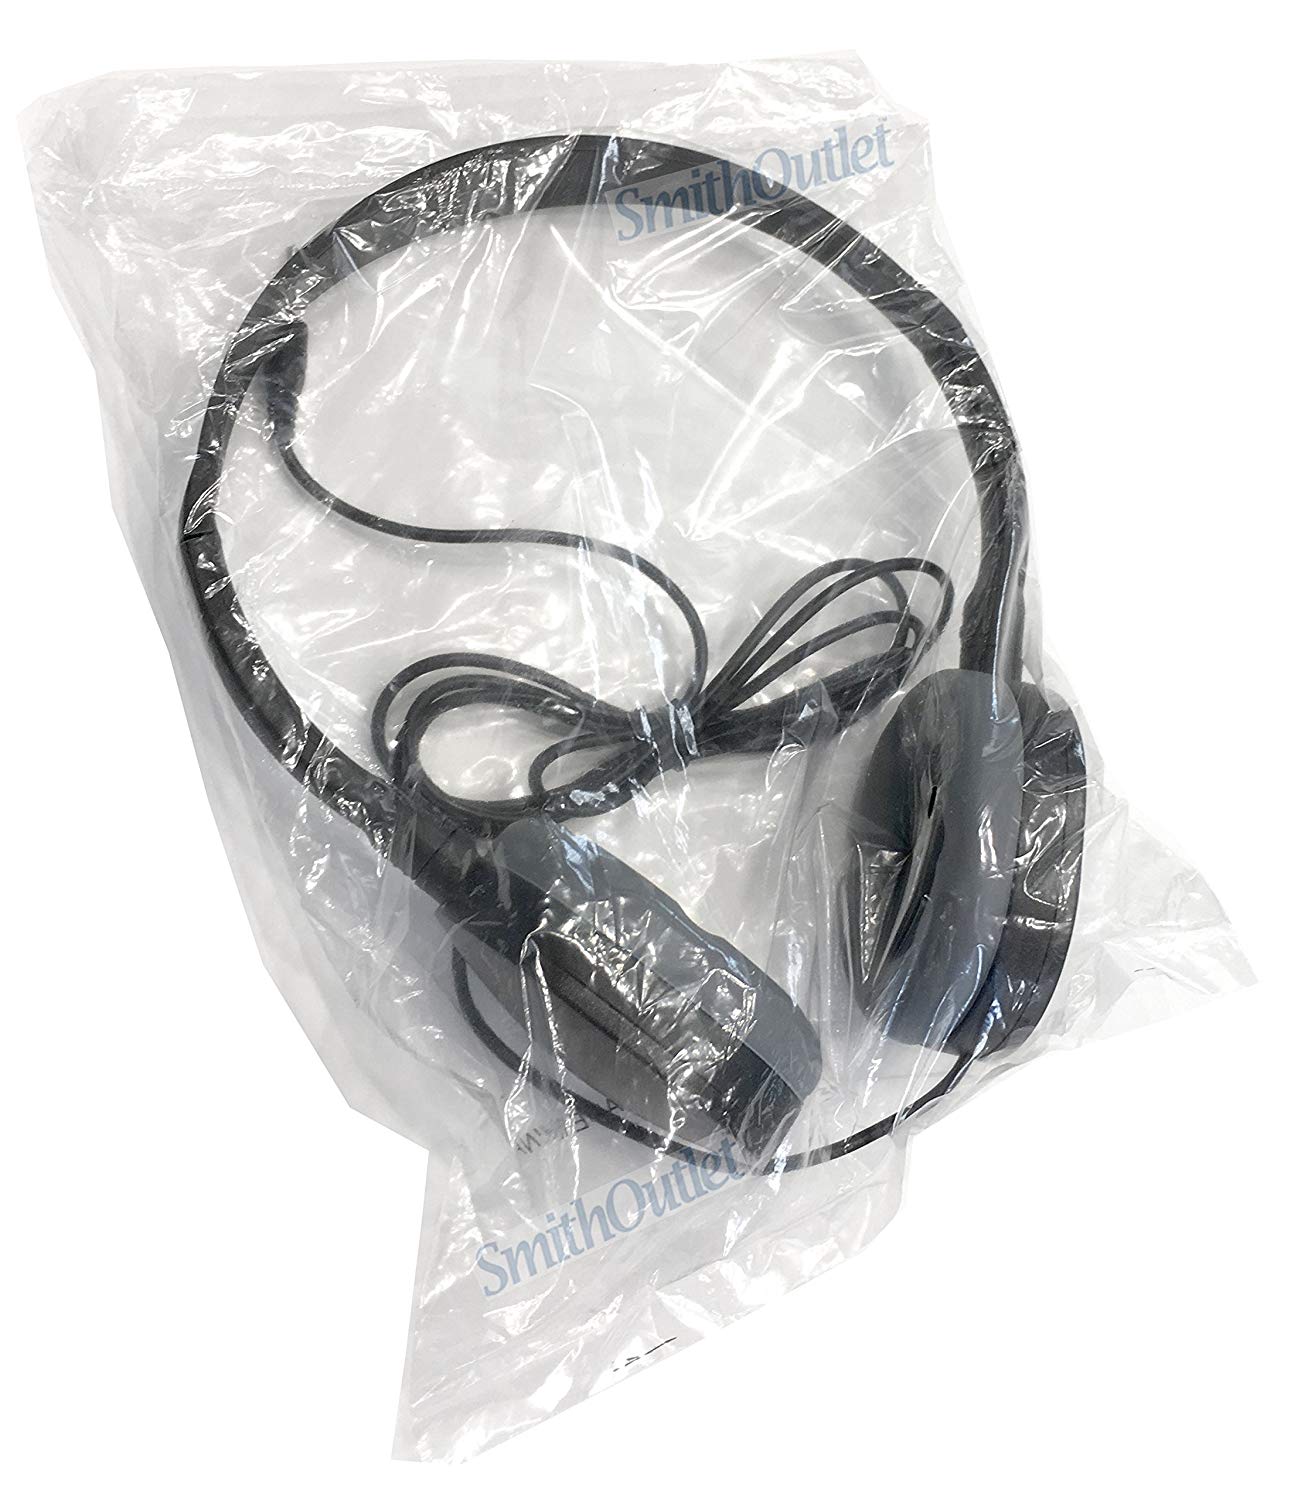 SmithOutlet 20 Pack Rubber Earpad Stereo Headphones